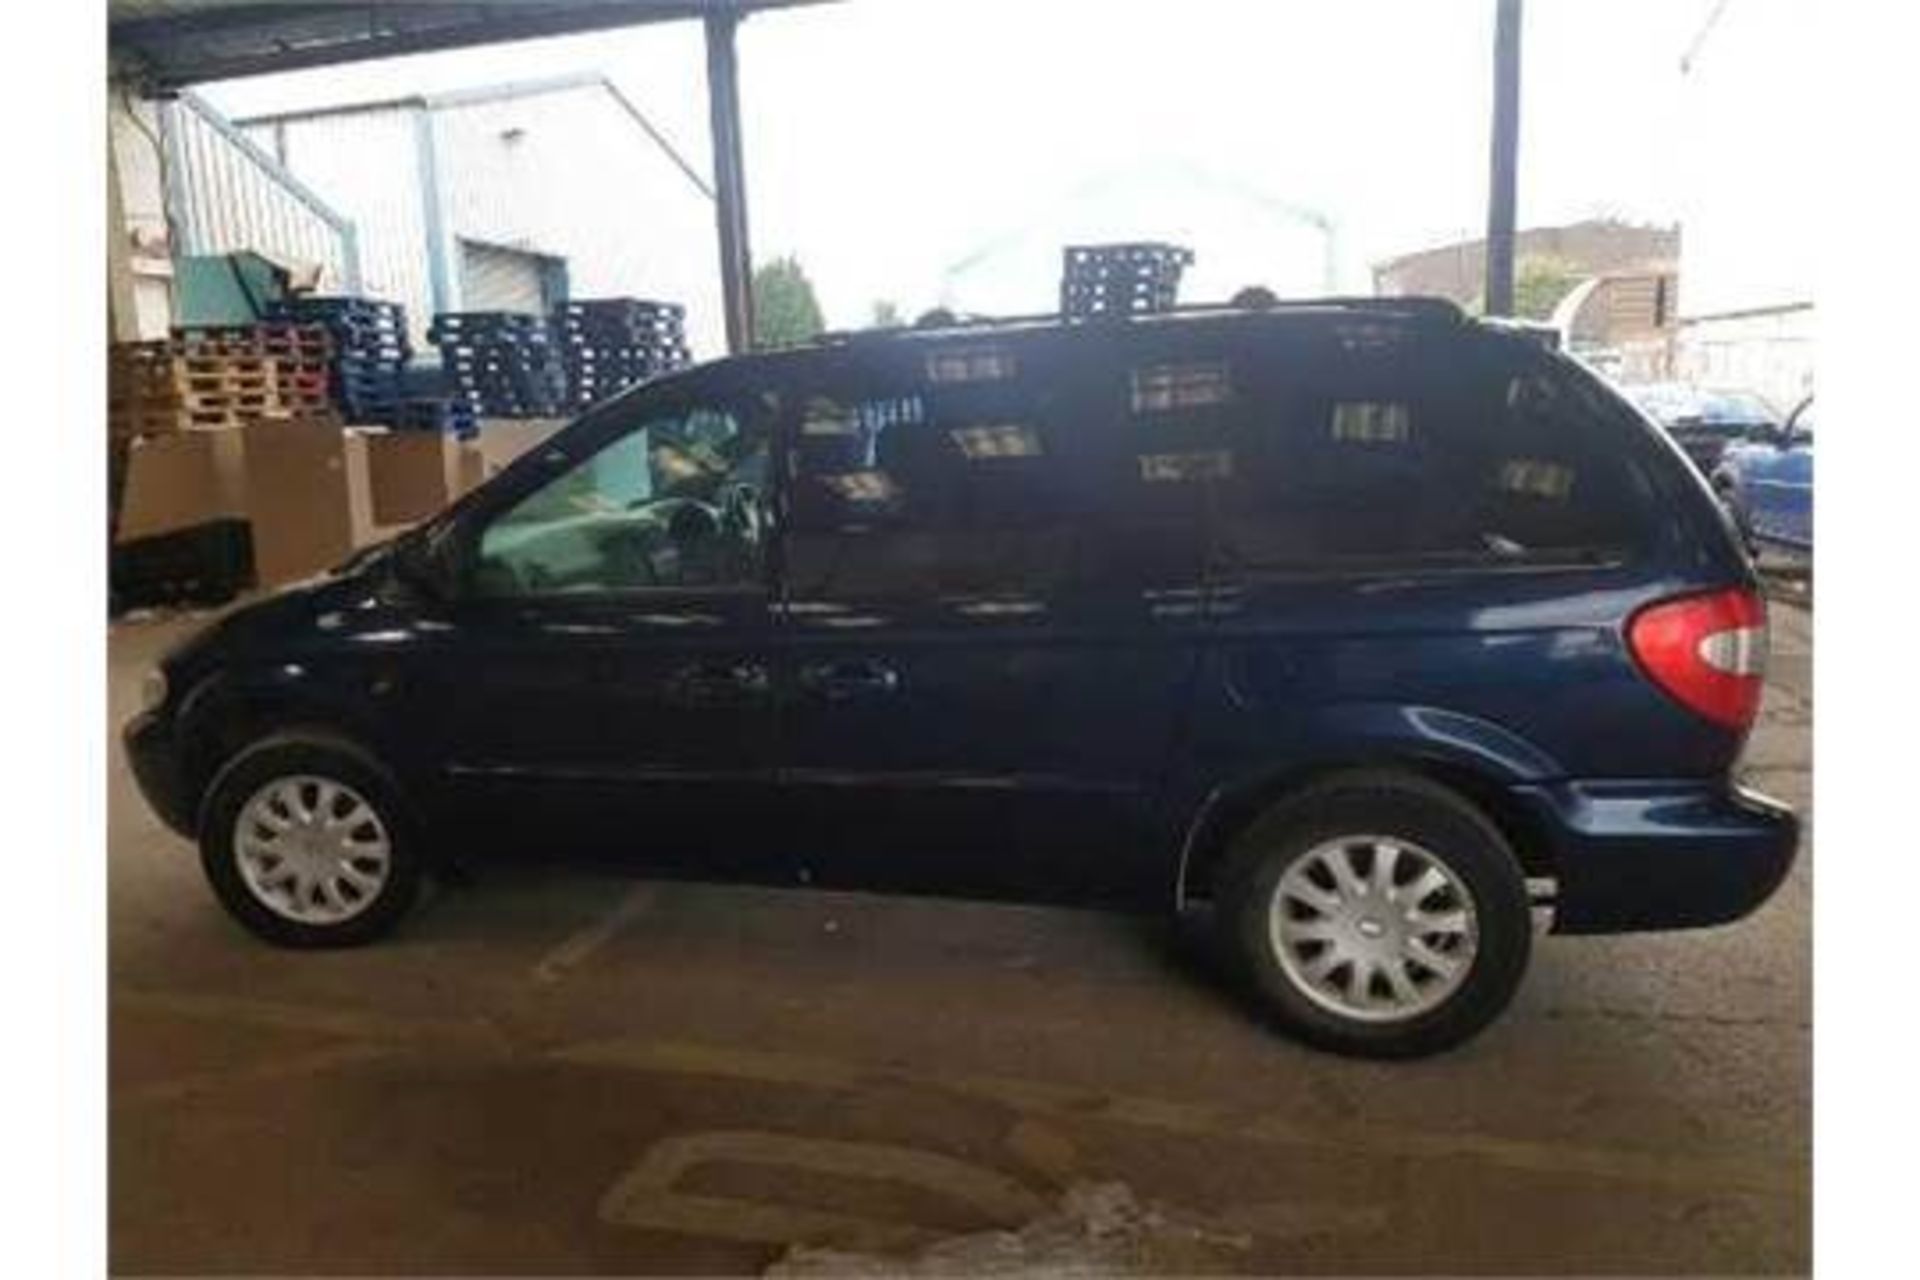 03 Plate Chrysler Grand Voyager CRD LX 2.5 108,379 Miles (unchecked), MOT Until 19th January 2017 - Image 3 of 10